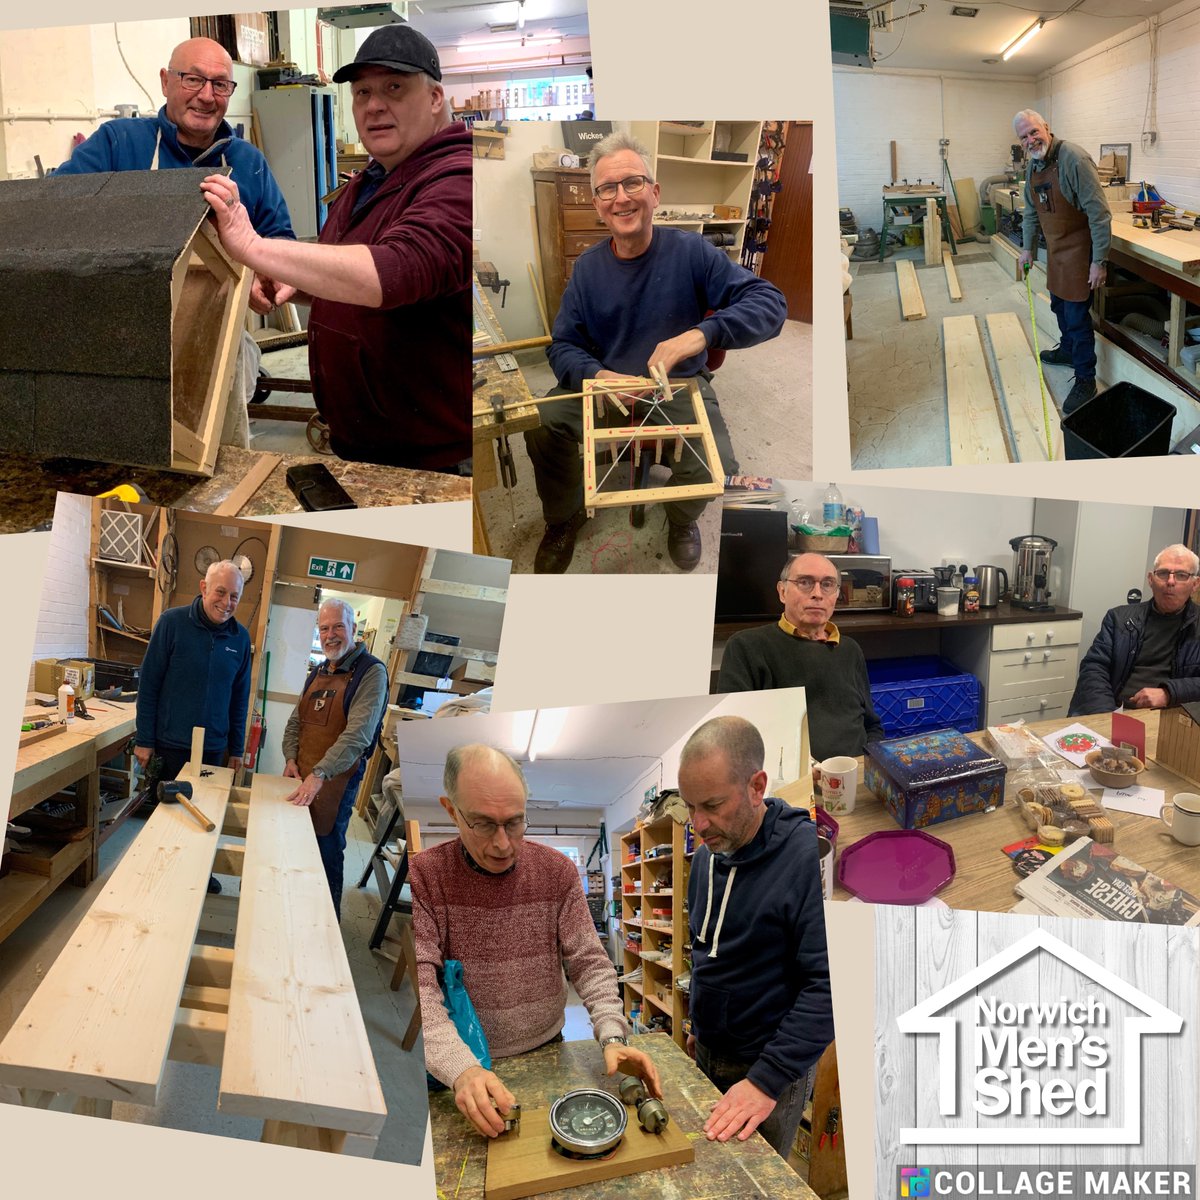 Down at the Shed - a few pictures that perfectly sum up a week at our workshops! Whether making items to sell, working on commissions or simply  chatting over a cuppa, our members really enjoy being part of the Shedding community

#mentalhealthmatters #norwichcharity  #menssheds